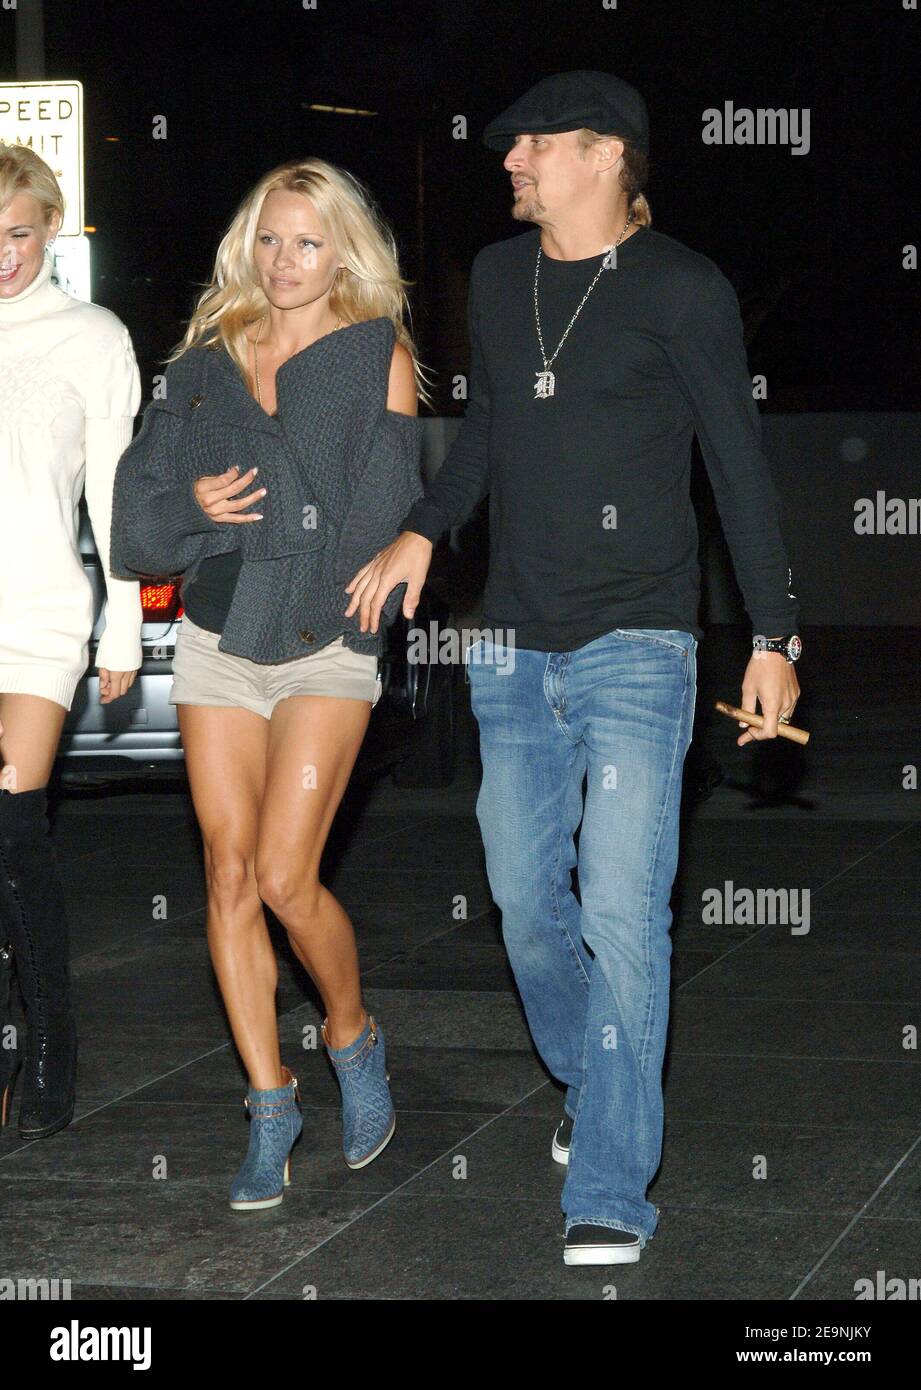 Pamela Anderson and her husband Kid Rock attend the Rolling Stone Magazine party to celebrate the 20th annual Hot List at the Stone Rose Lounge in Los Angeles, CA, USA on October 3, 2006. Photo by Lionel Hahn/ABACAPRESS.COM Stock Photo